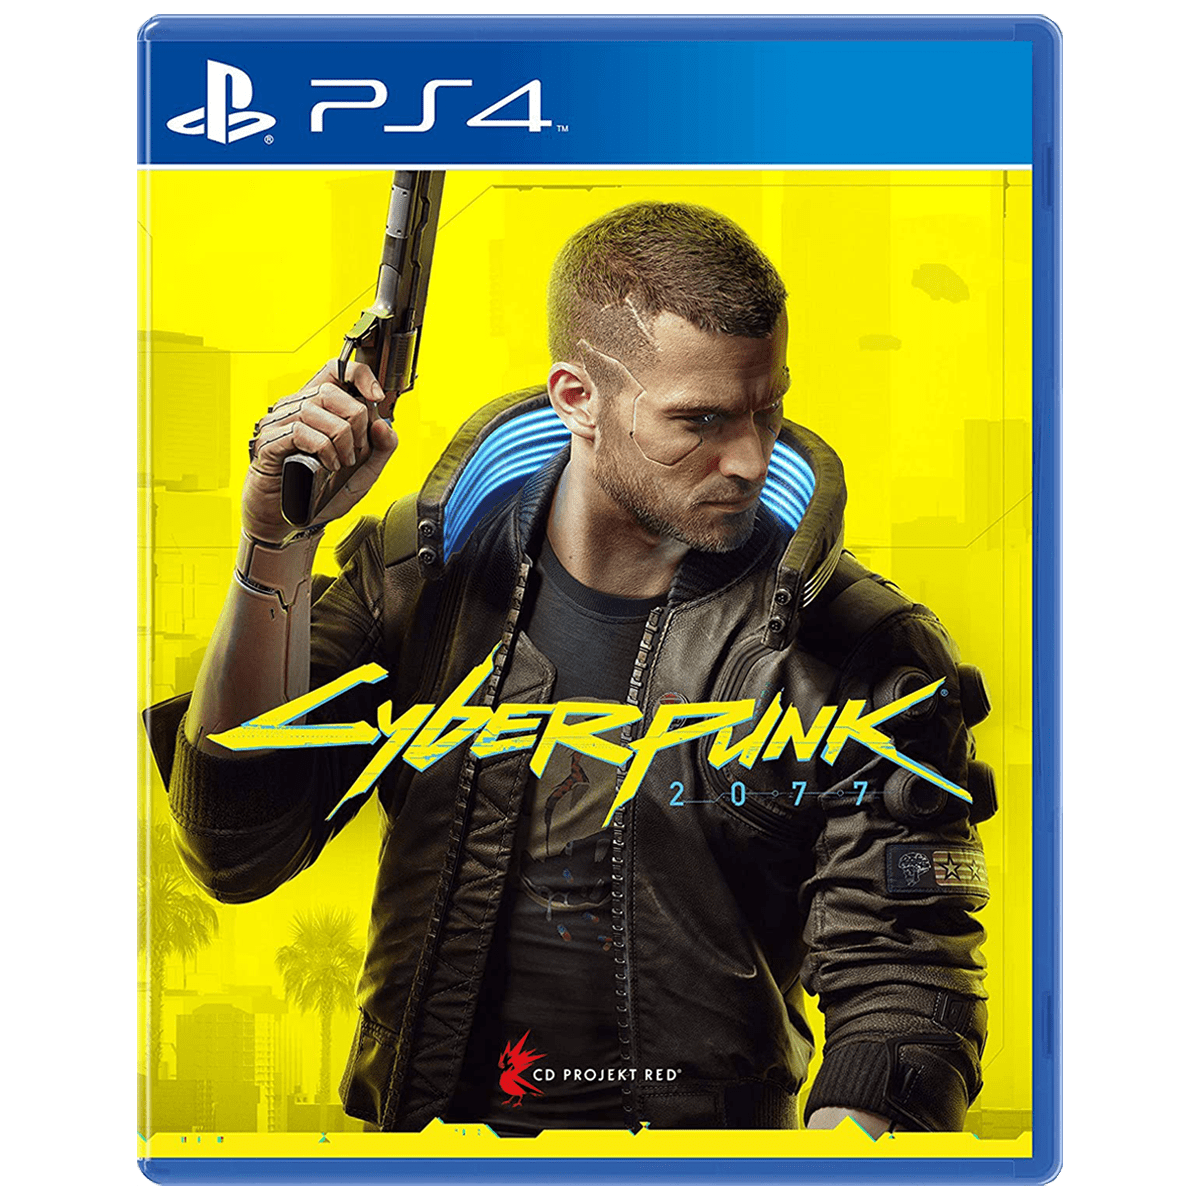 Square Enix Cyberpunk 2077 For PS4 (Action-Adventure Games, Standard Edition)_1